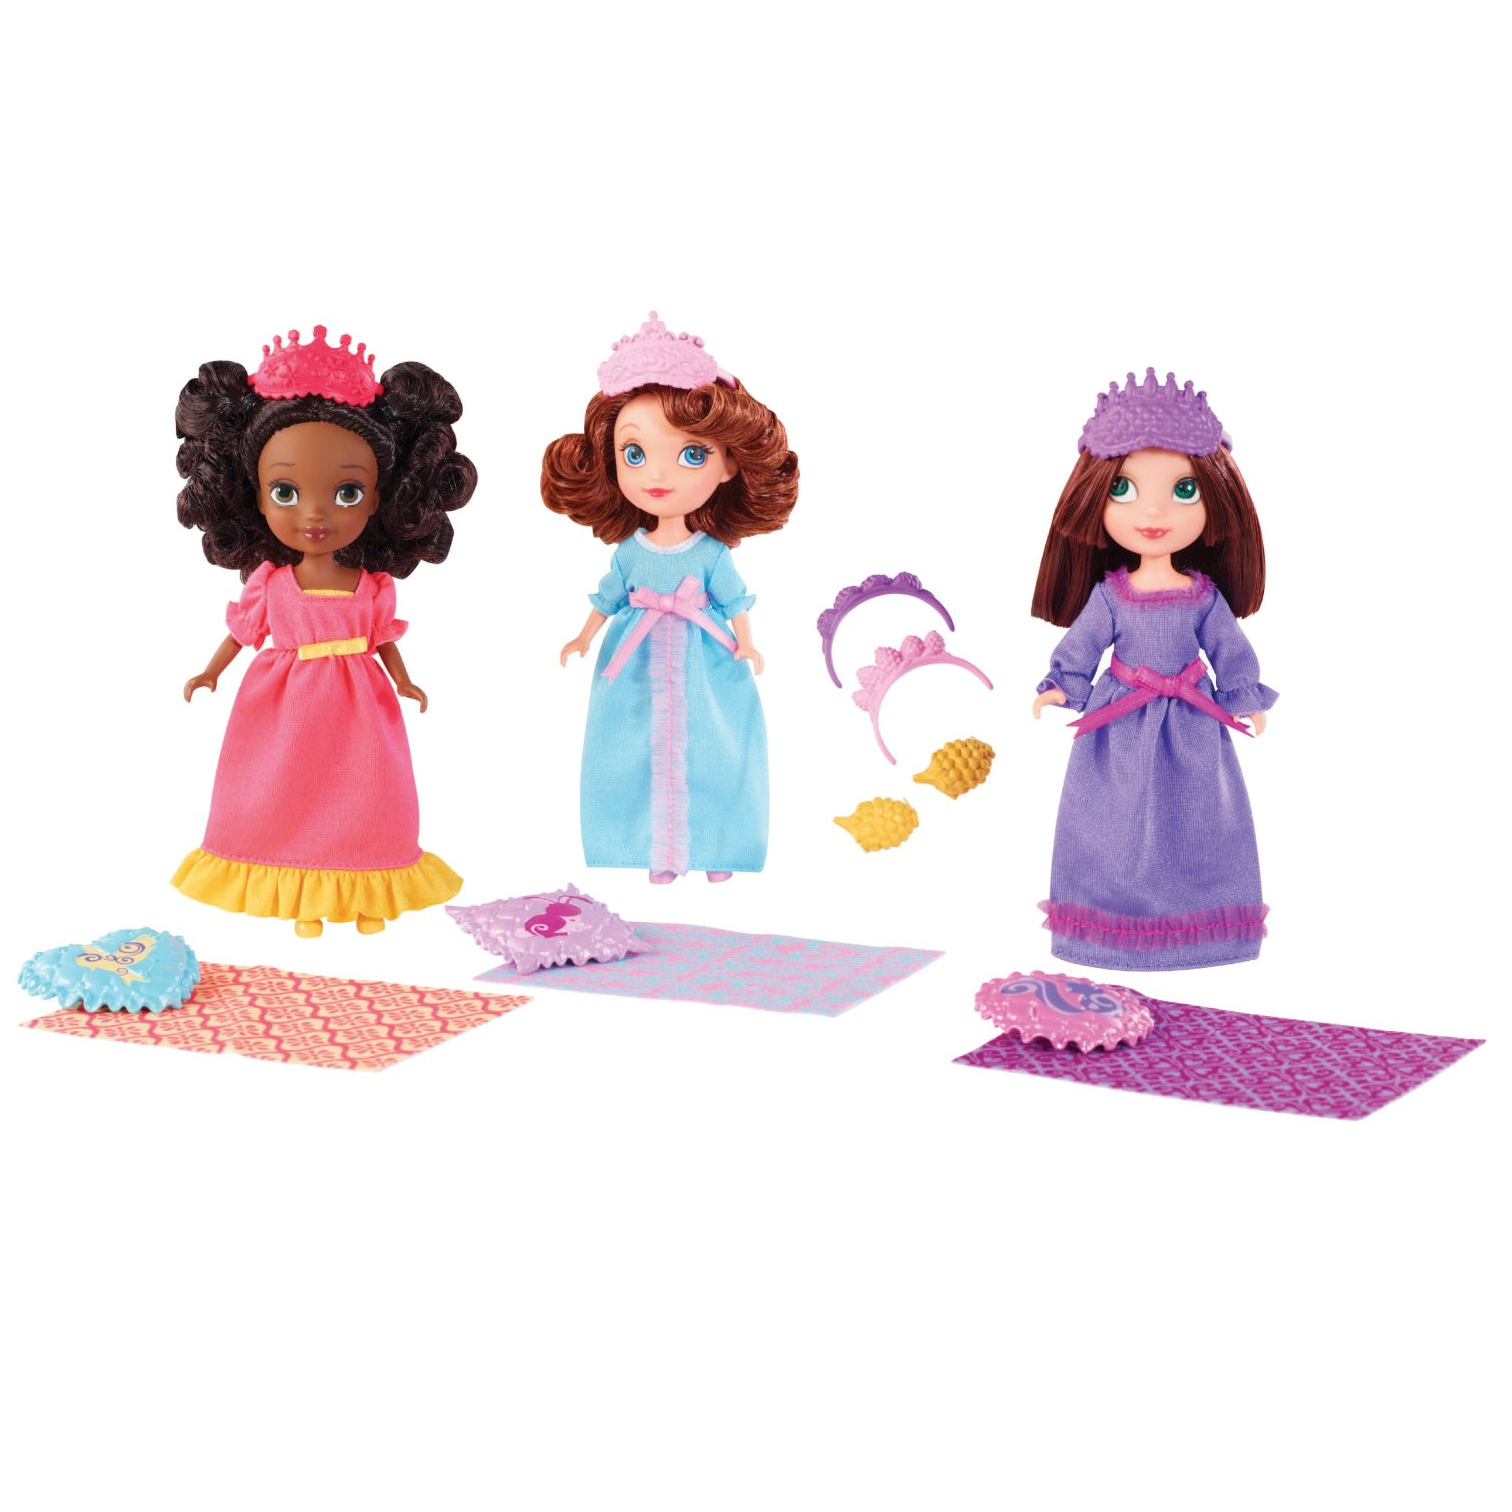 Disney Sofia the First Royal Sleepover Doll 3 Pack Only $12.99! (Reg $27.99)